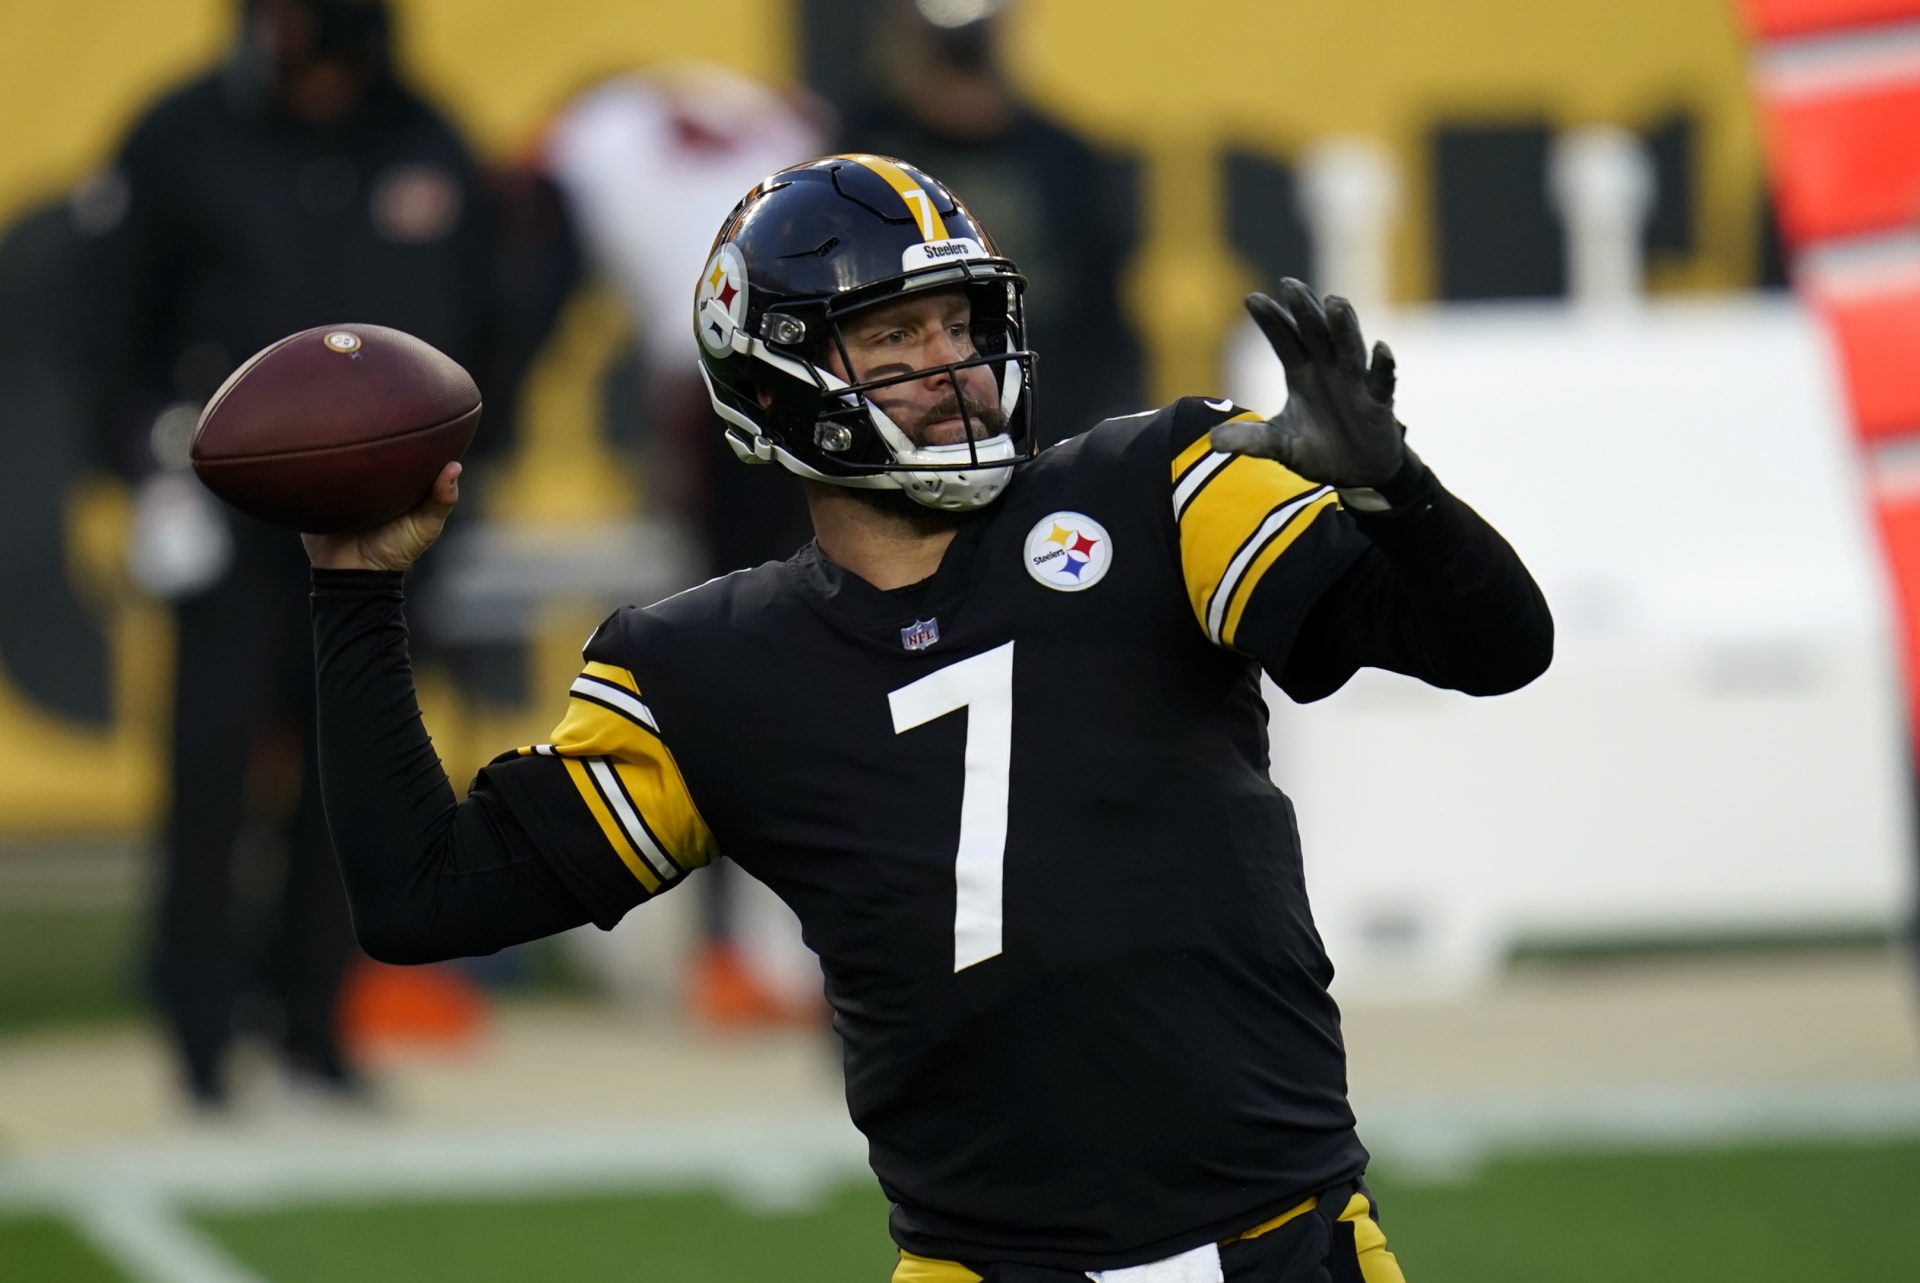 Pittsburgh Steelers quarterback Ben Roethlisberger (7) throws a pass during the first half of an NFL football game against the Cincinnati Bengals, Sunday, Nov. 15, 2020, in Pittsburgh.